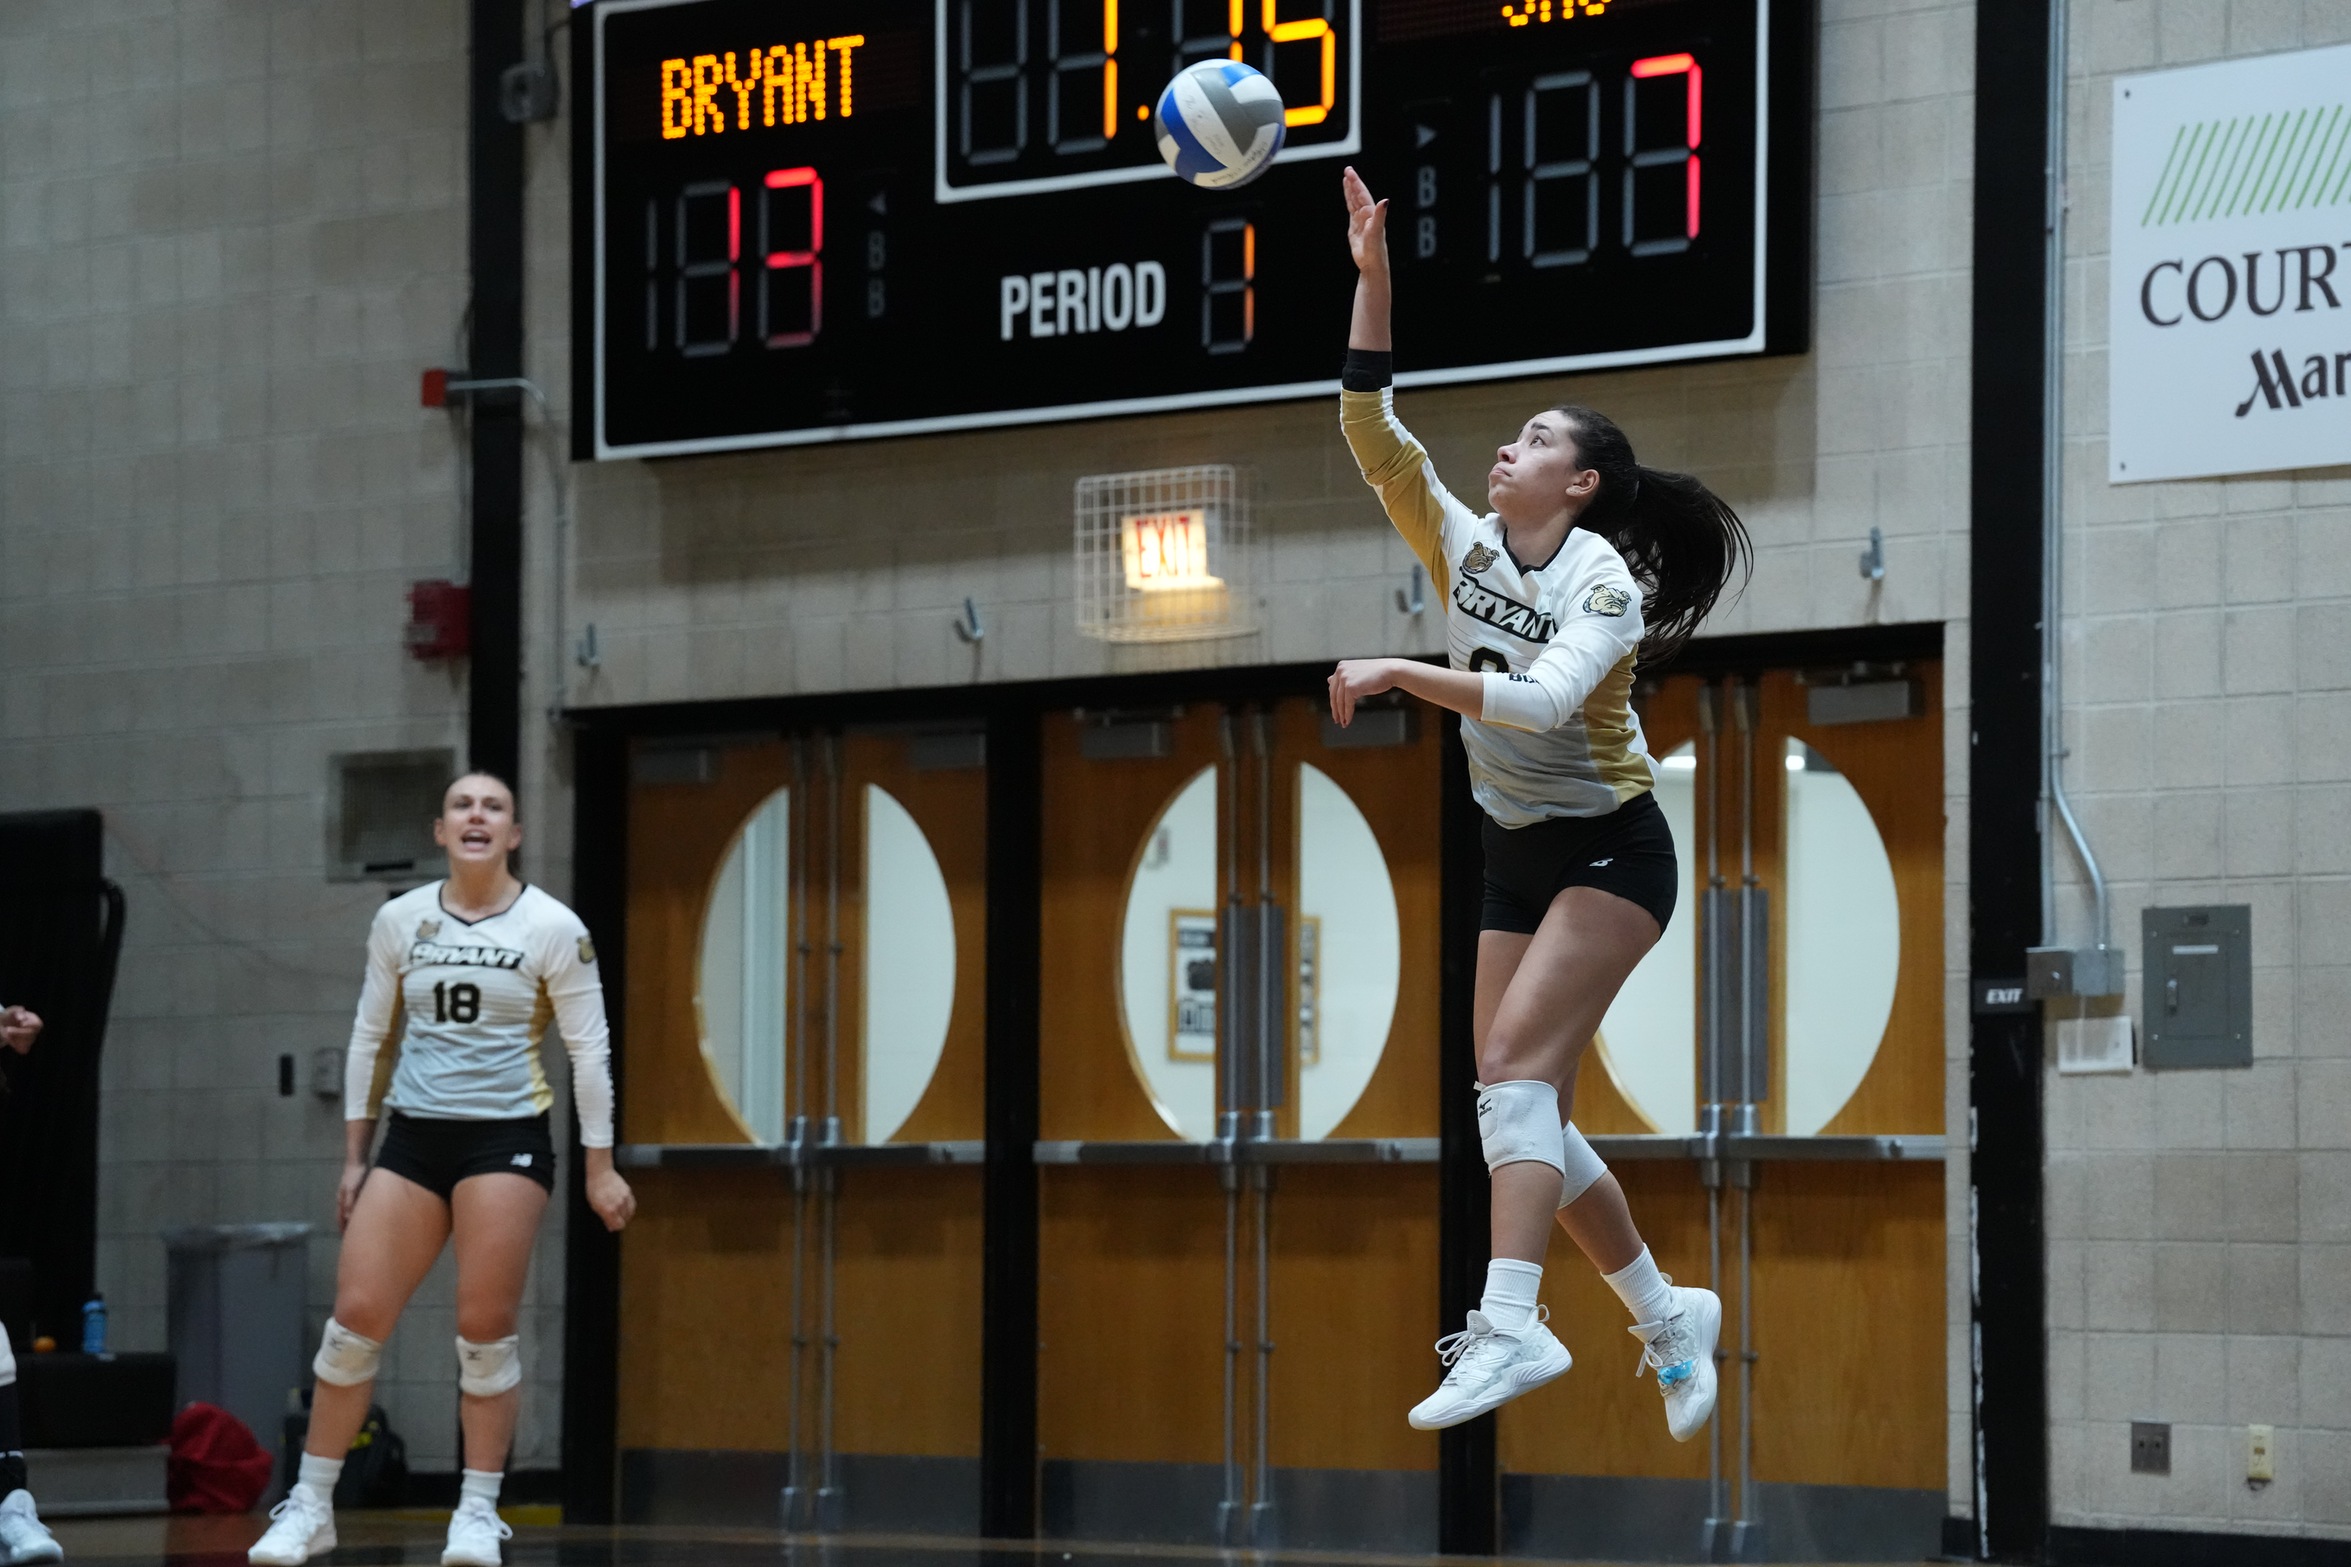 Bryant returns to conference play this weekend against UMBC